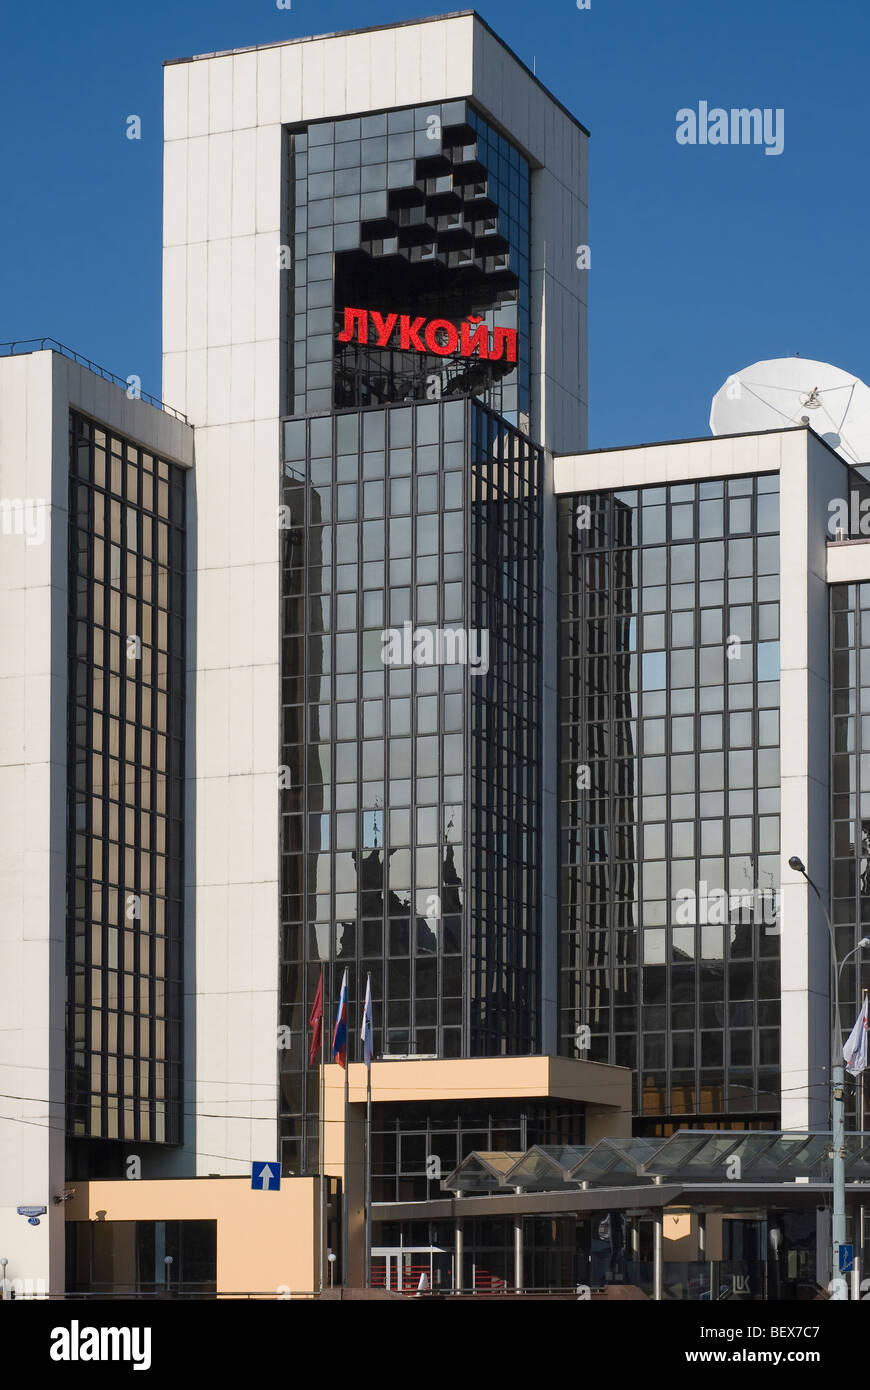 Headquarters of the Russian oil company Lukoil. Moscow, Russia Stock Photo